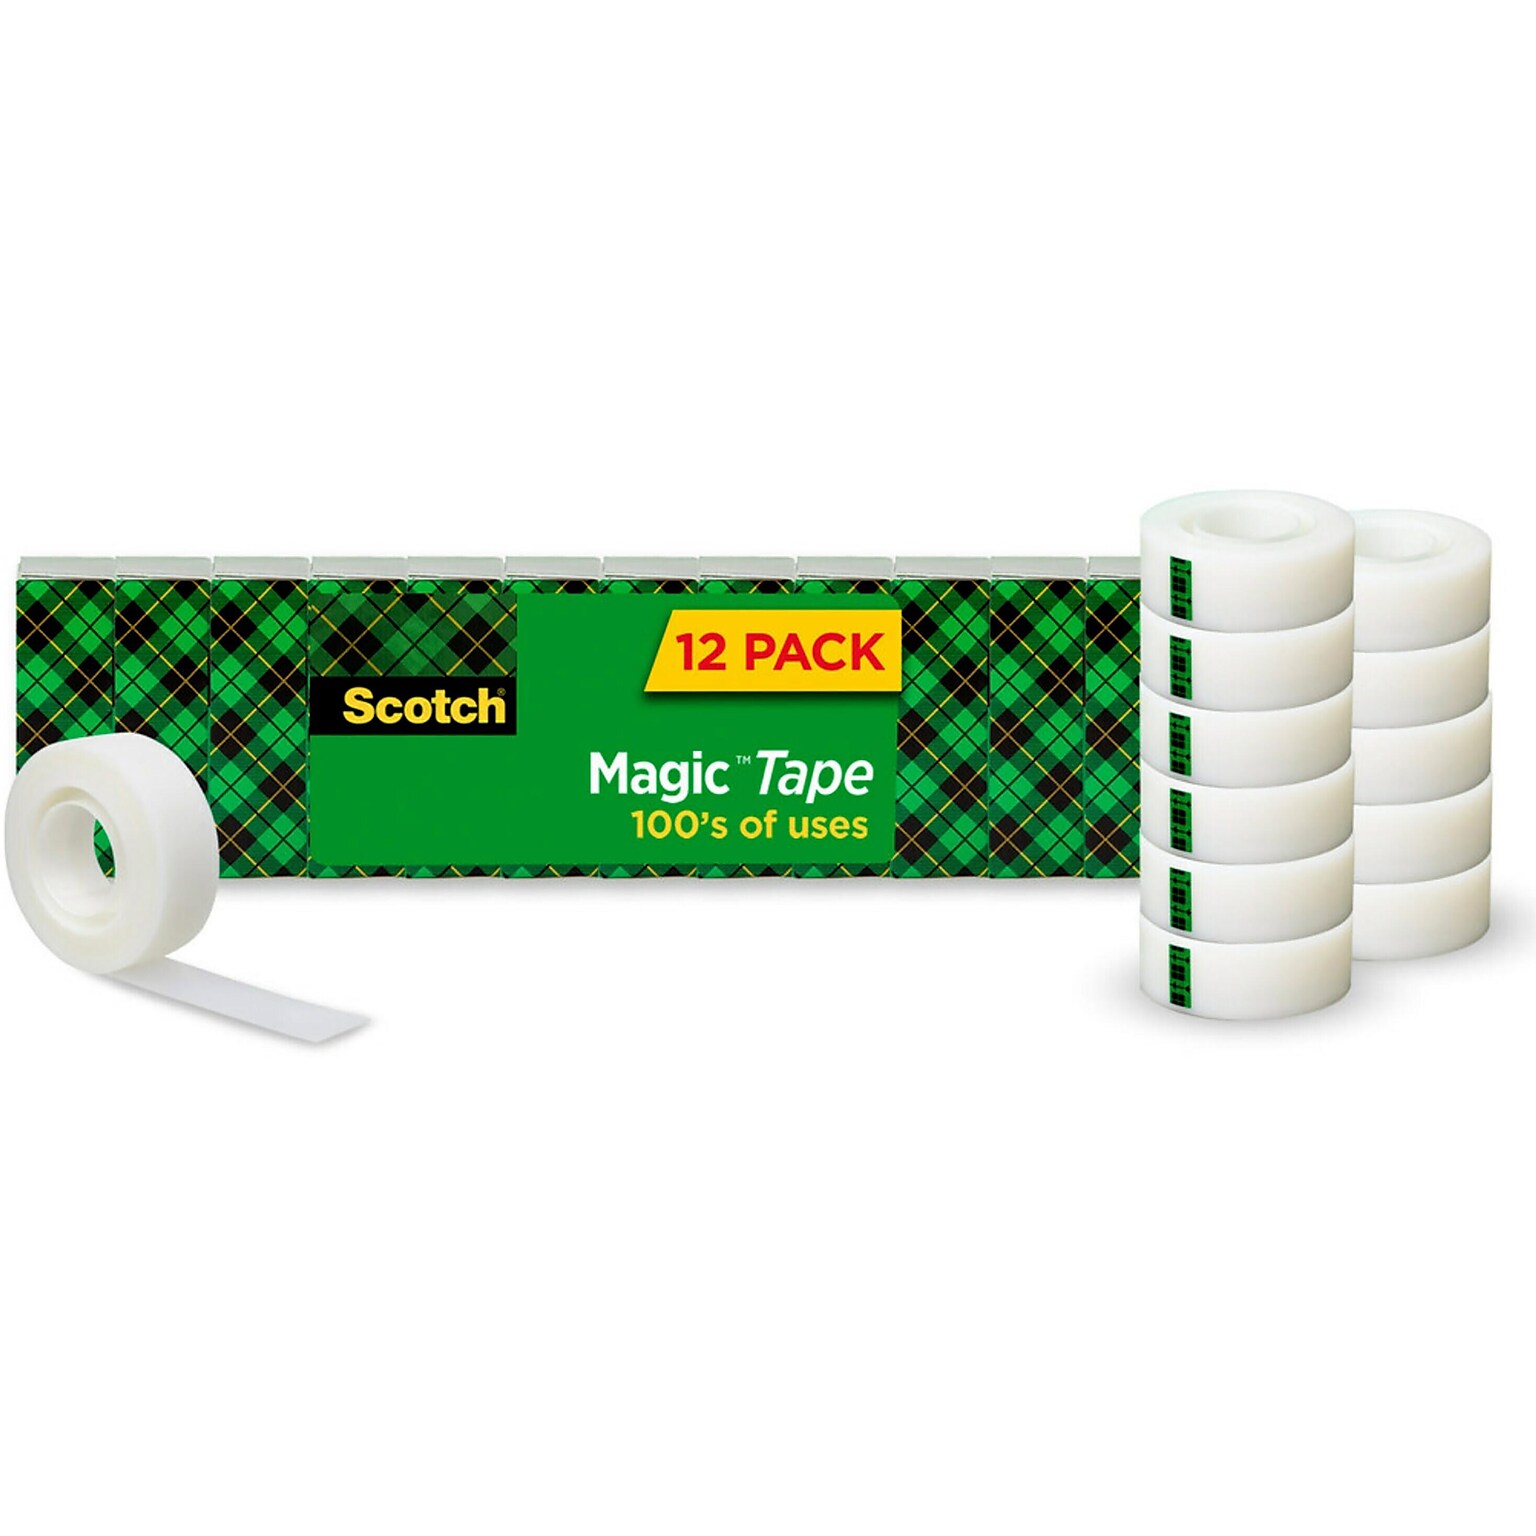 Scotch Magic Tape, Invisible, 3/4 in x 1000 in, 12 Tape Rolls, Clear, Refill, Home Office and Back to School Classroom Supplies